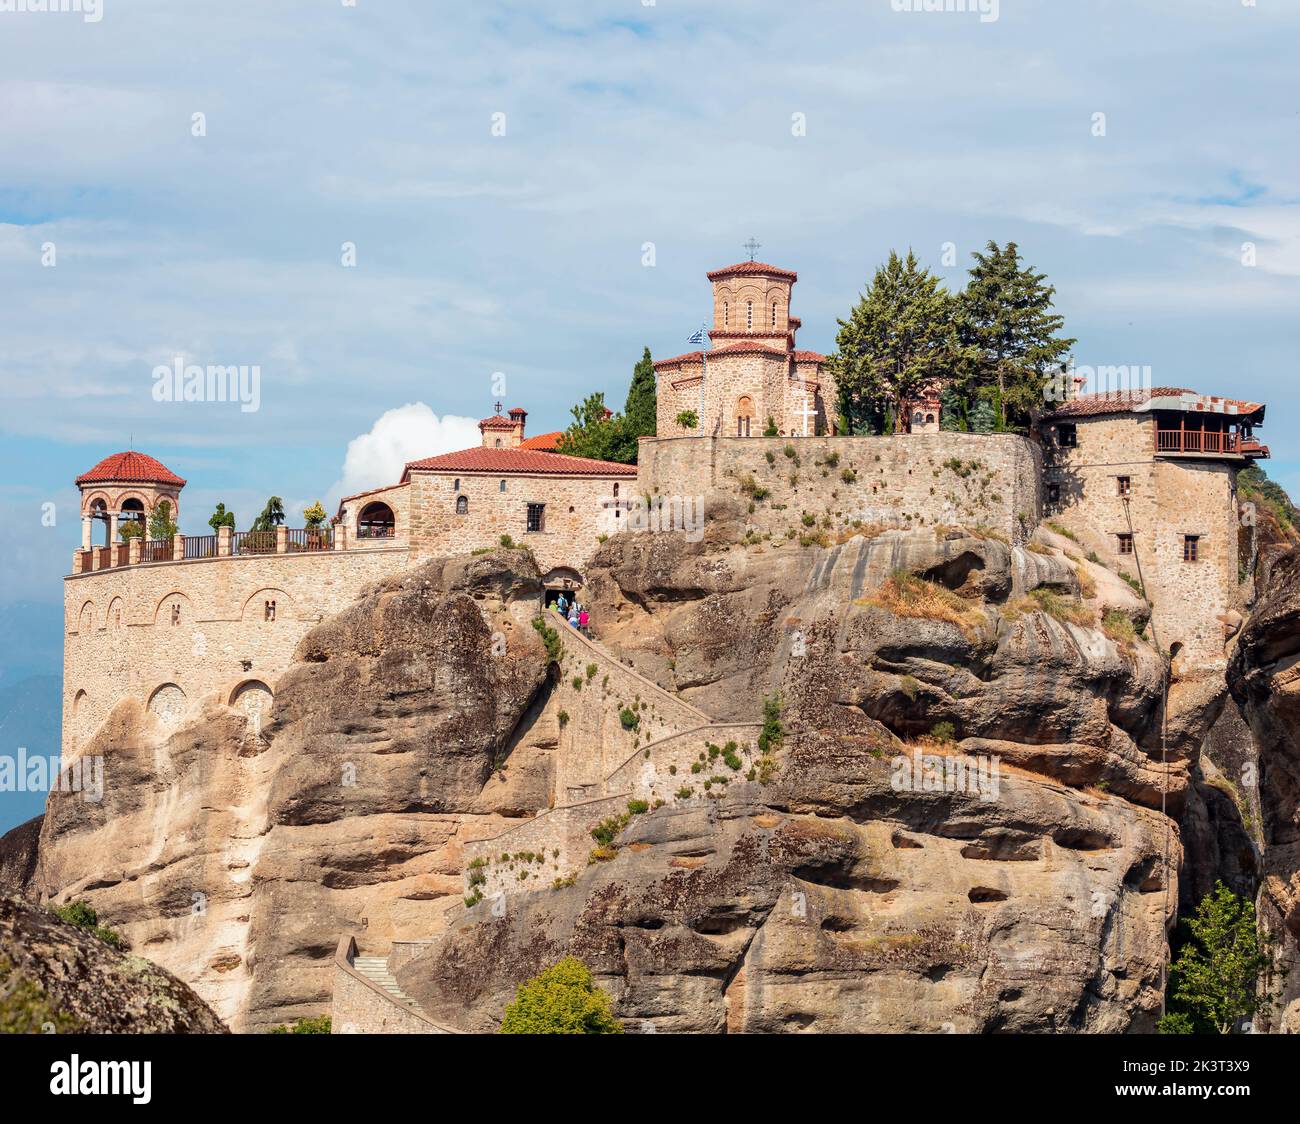 Meteora Greece. Varlaam Holy Monastery buildings on top of rocks, blue cloudy sky, close up view. Europe religion travel destination Stock Photo